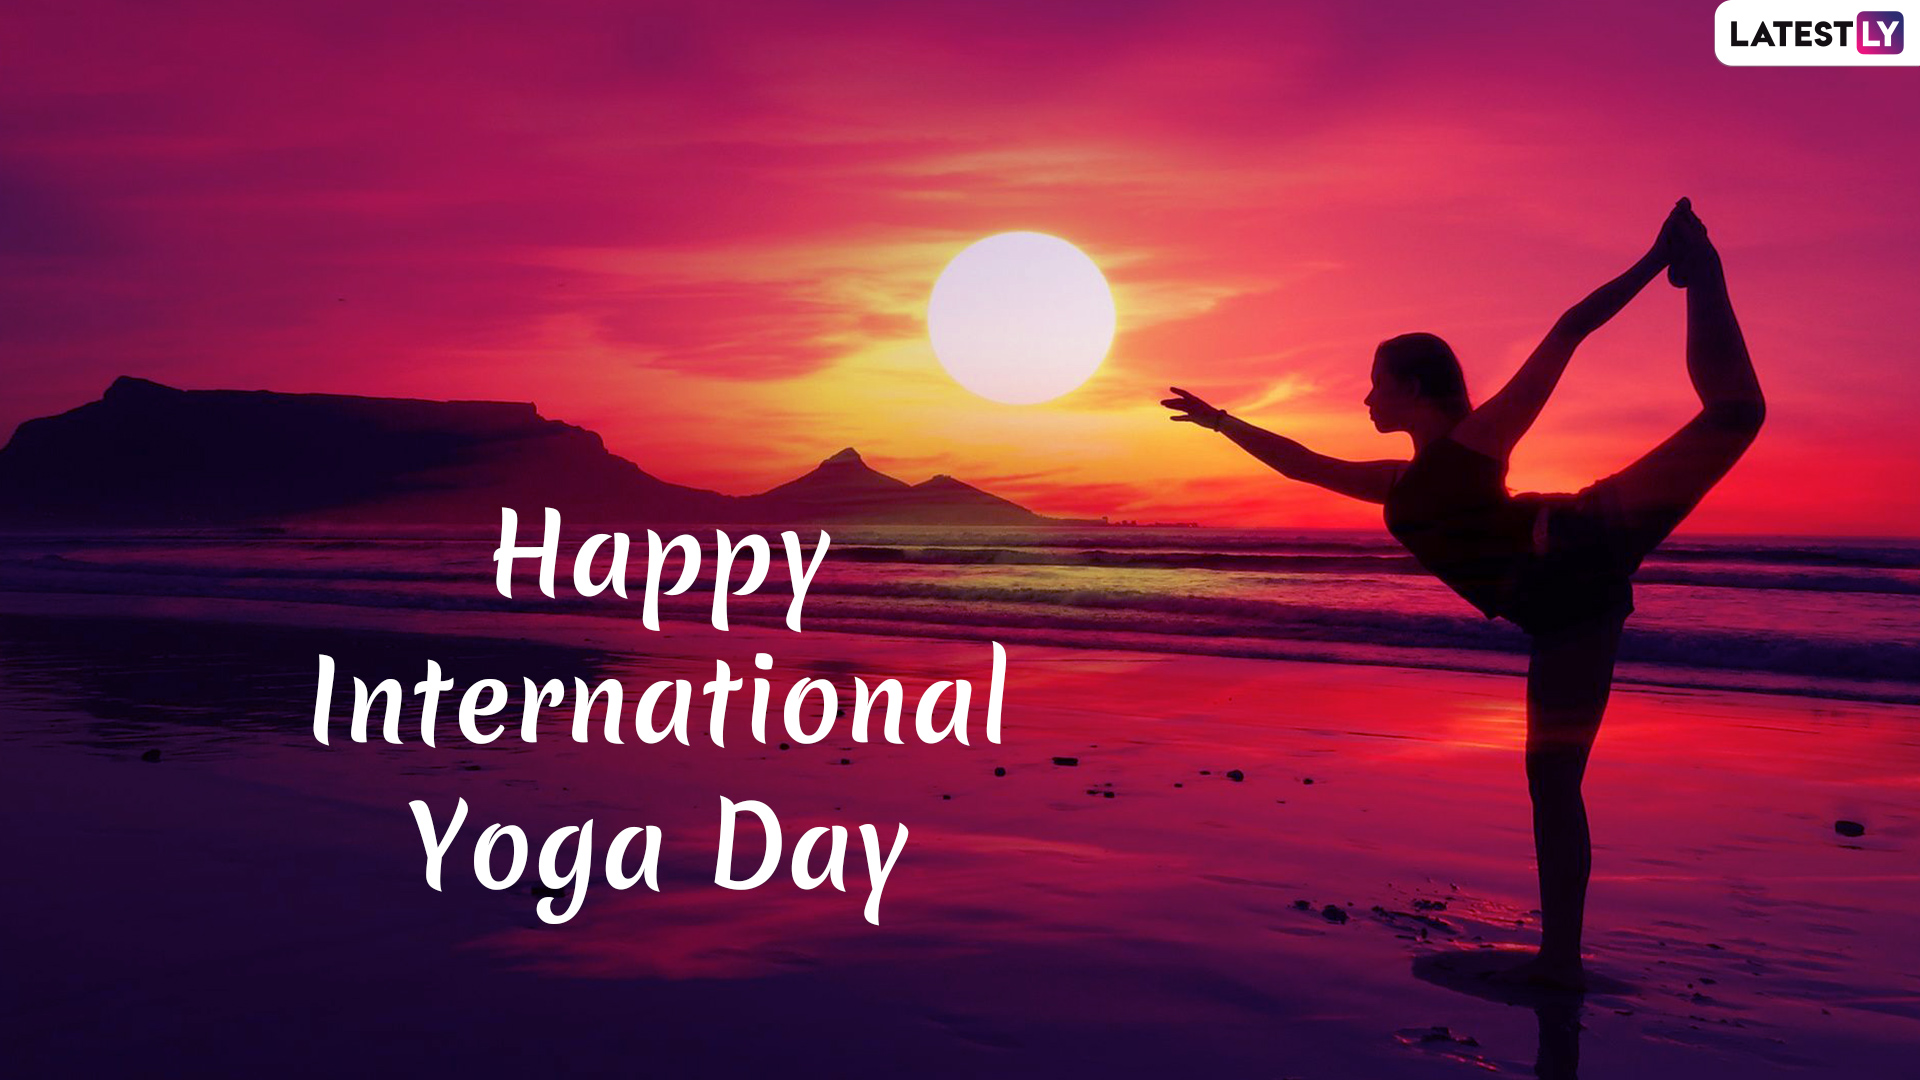 International Yoga Day Image HD Wallpaper With Quotes For